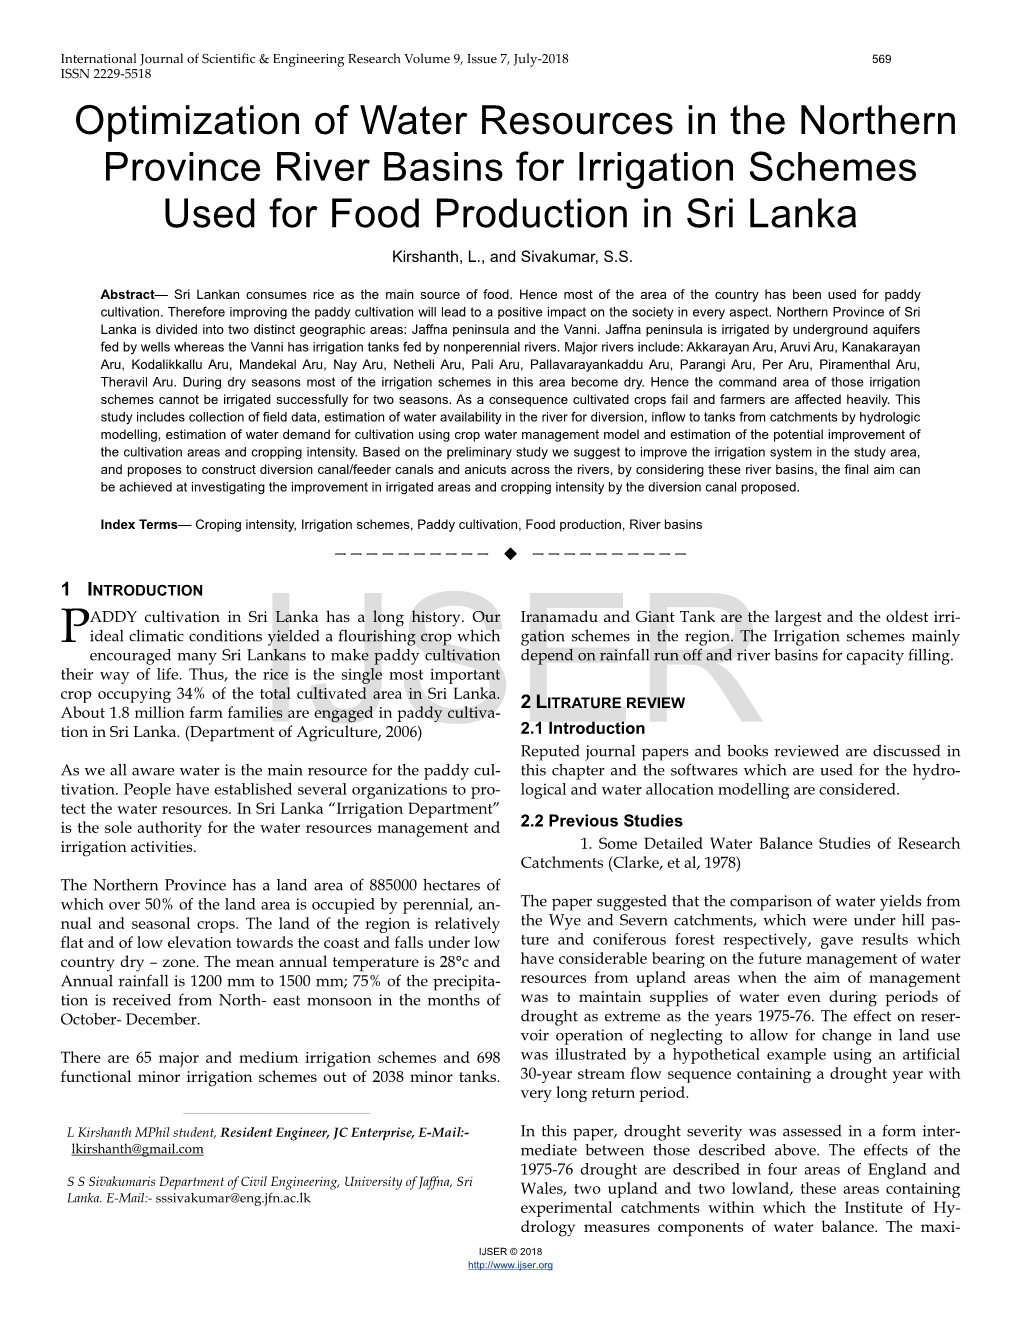 Optimization of Water Resources in the Northern Province River Basins for Irrigation Schemes Used for Food Production in Sri Lanka Kirshanth, L., and Sivakumar, S.S